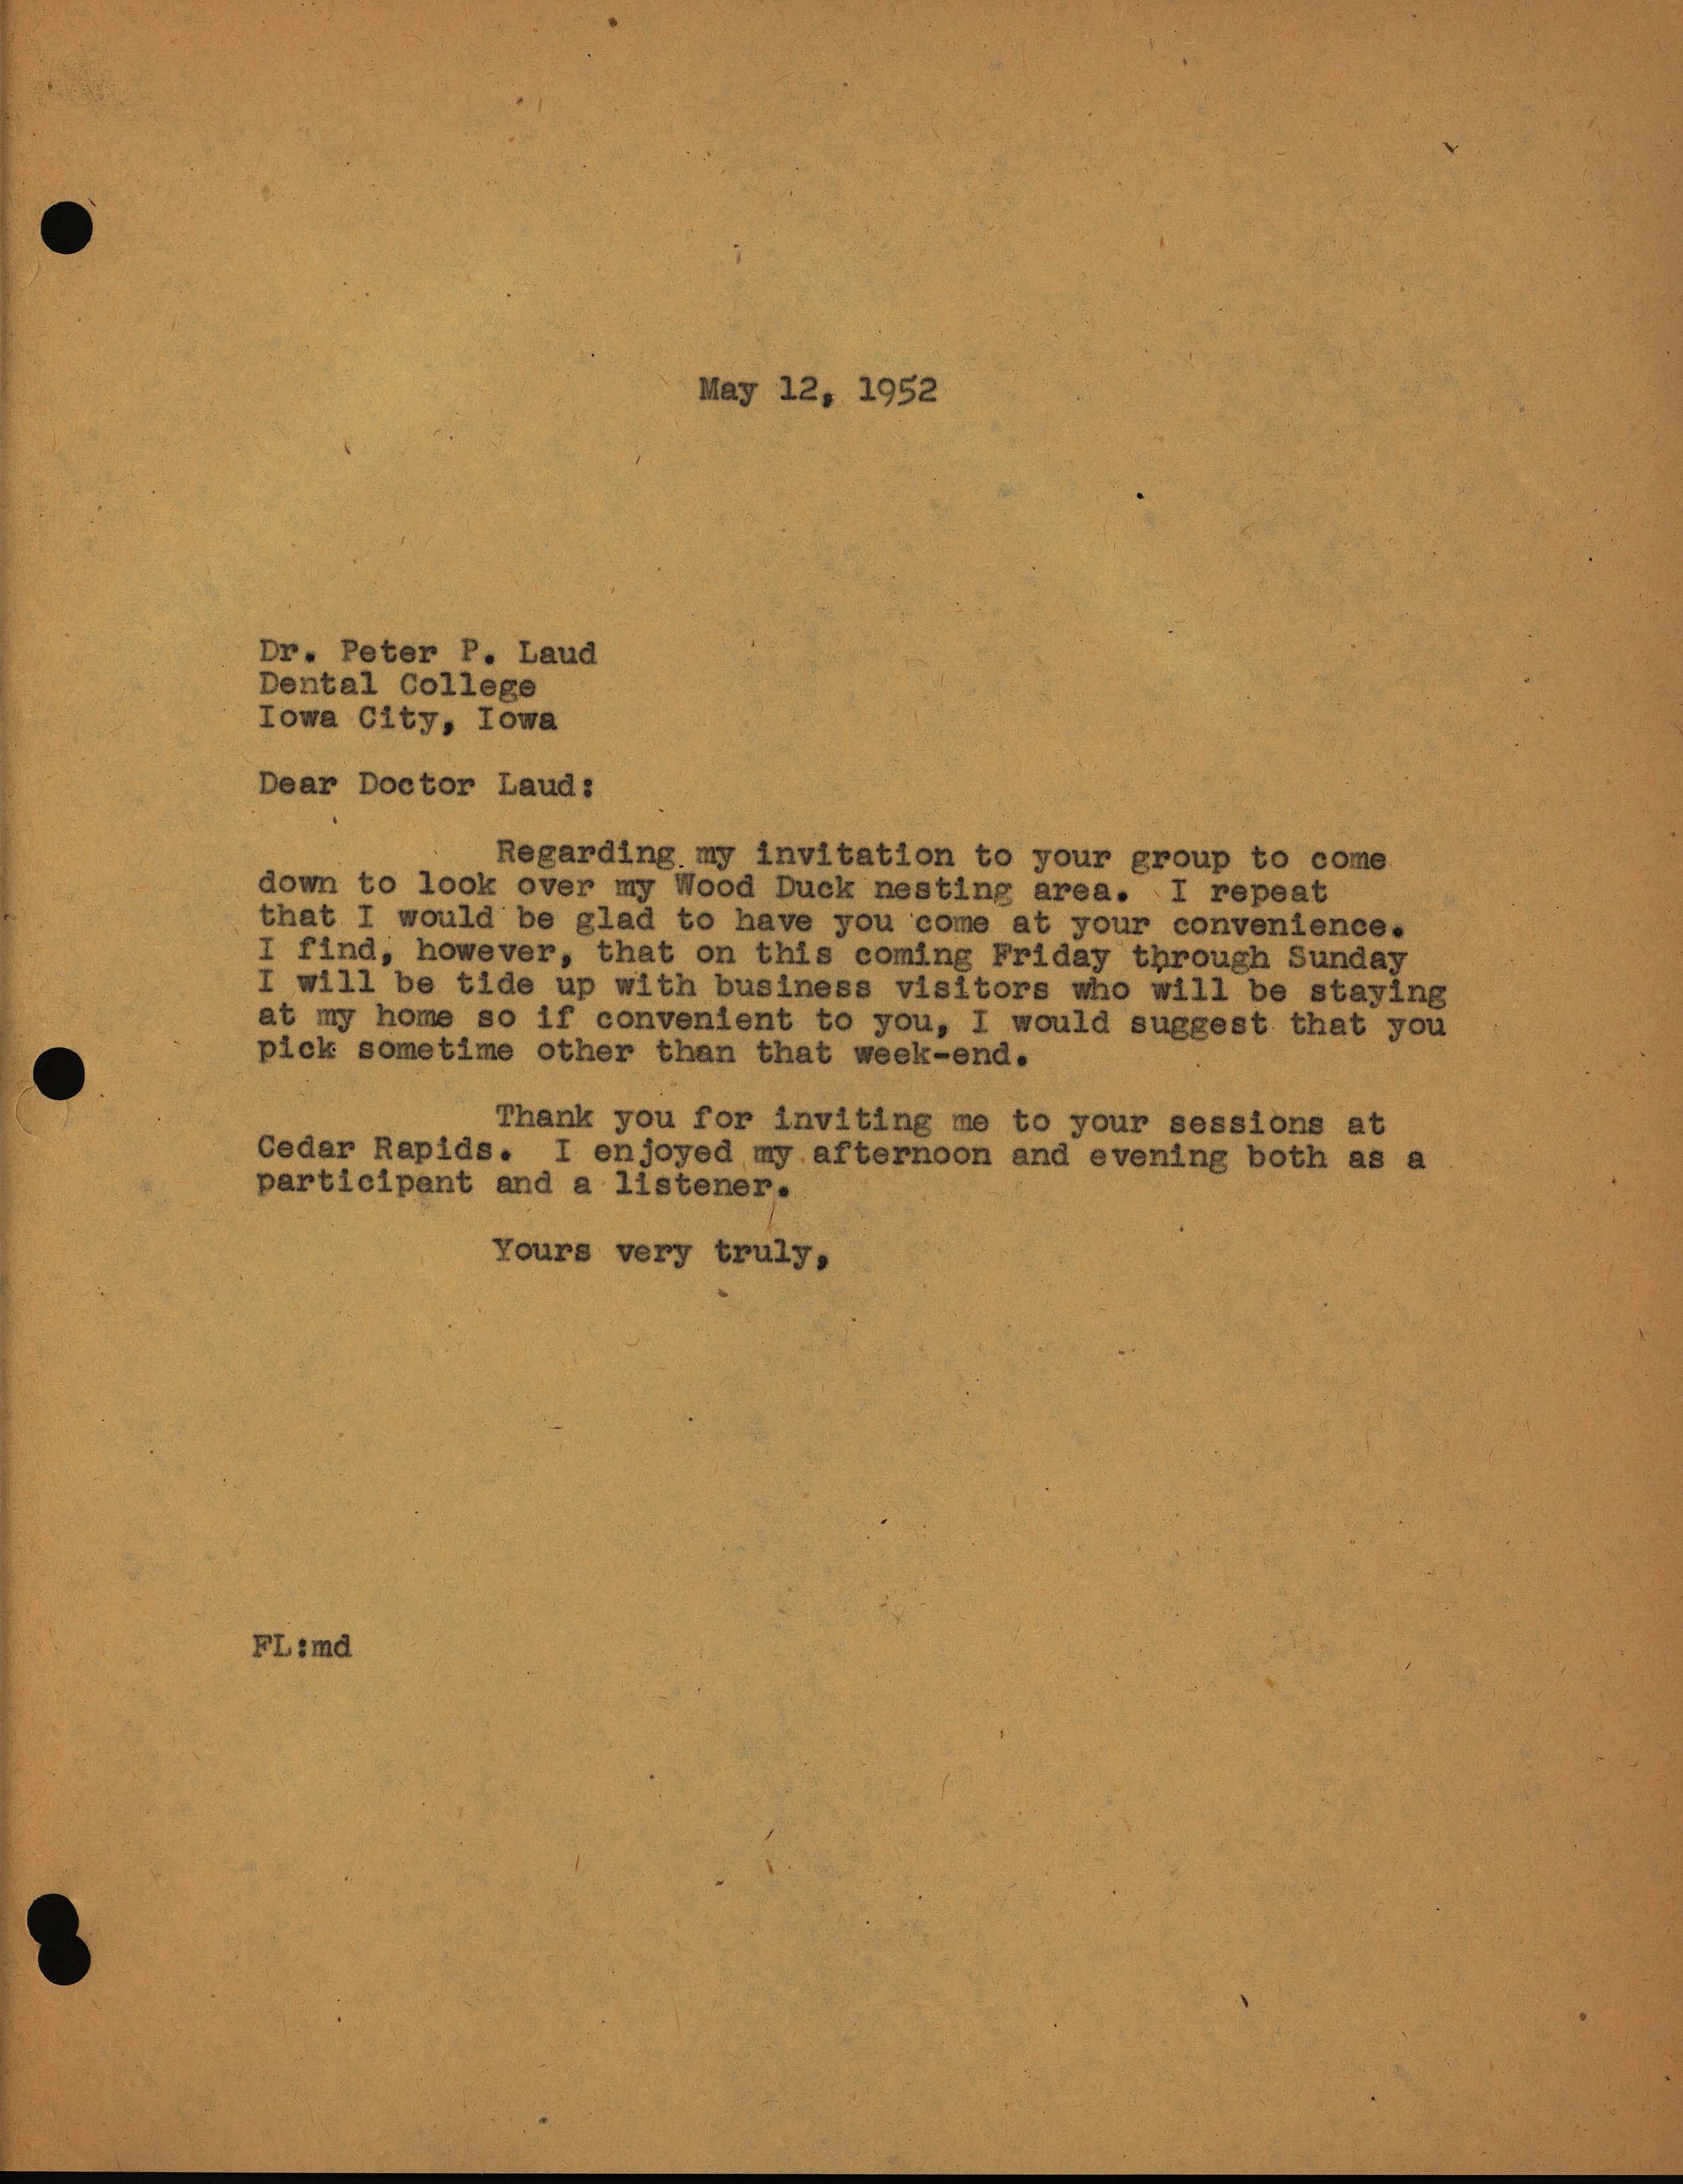 Frederic Leopold letter to Peter P. Laude regarding nesting Wood Ducks and the Iowa Ornithologists' Union annual convention, May 12, 1952